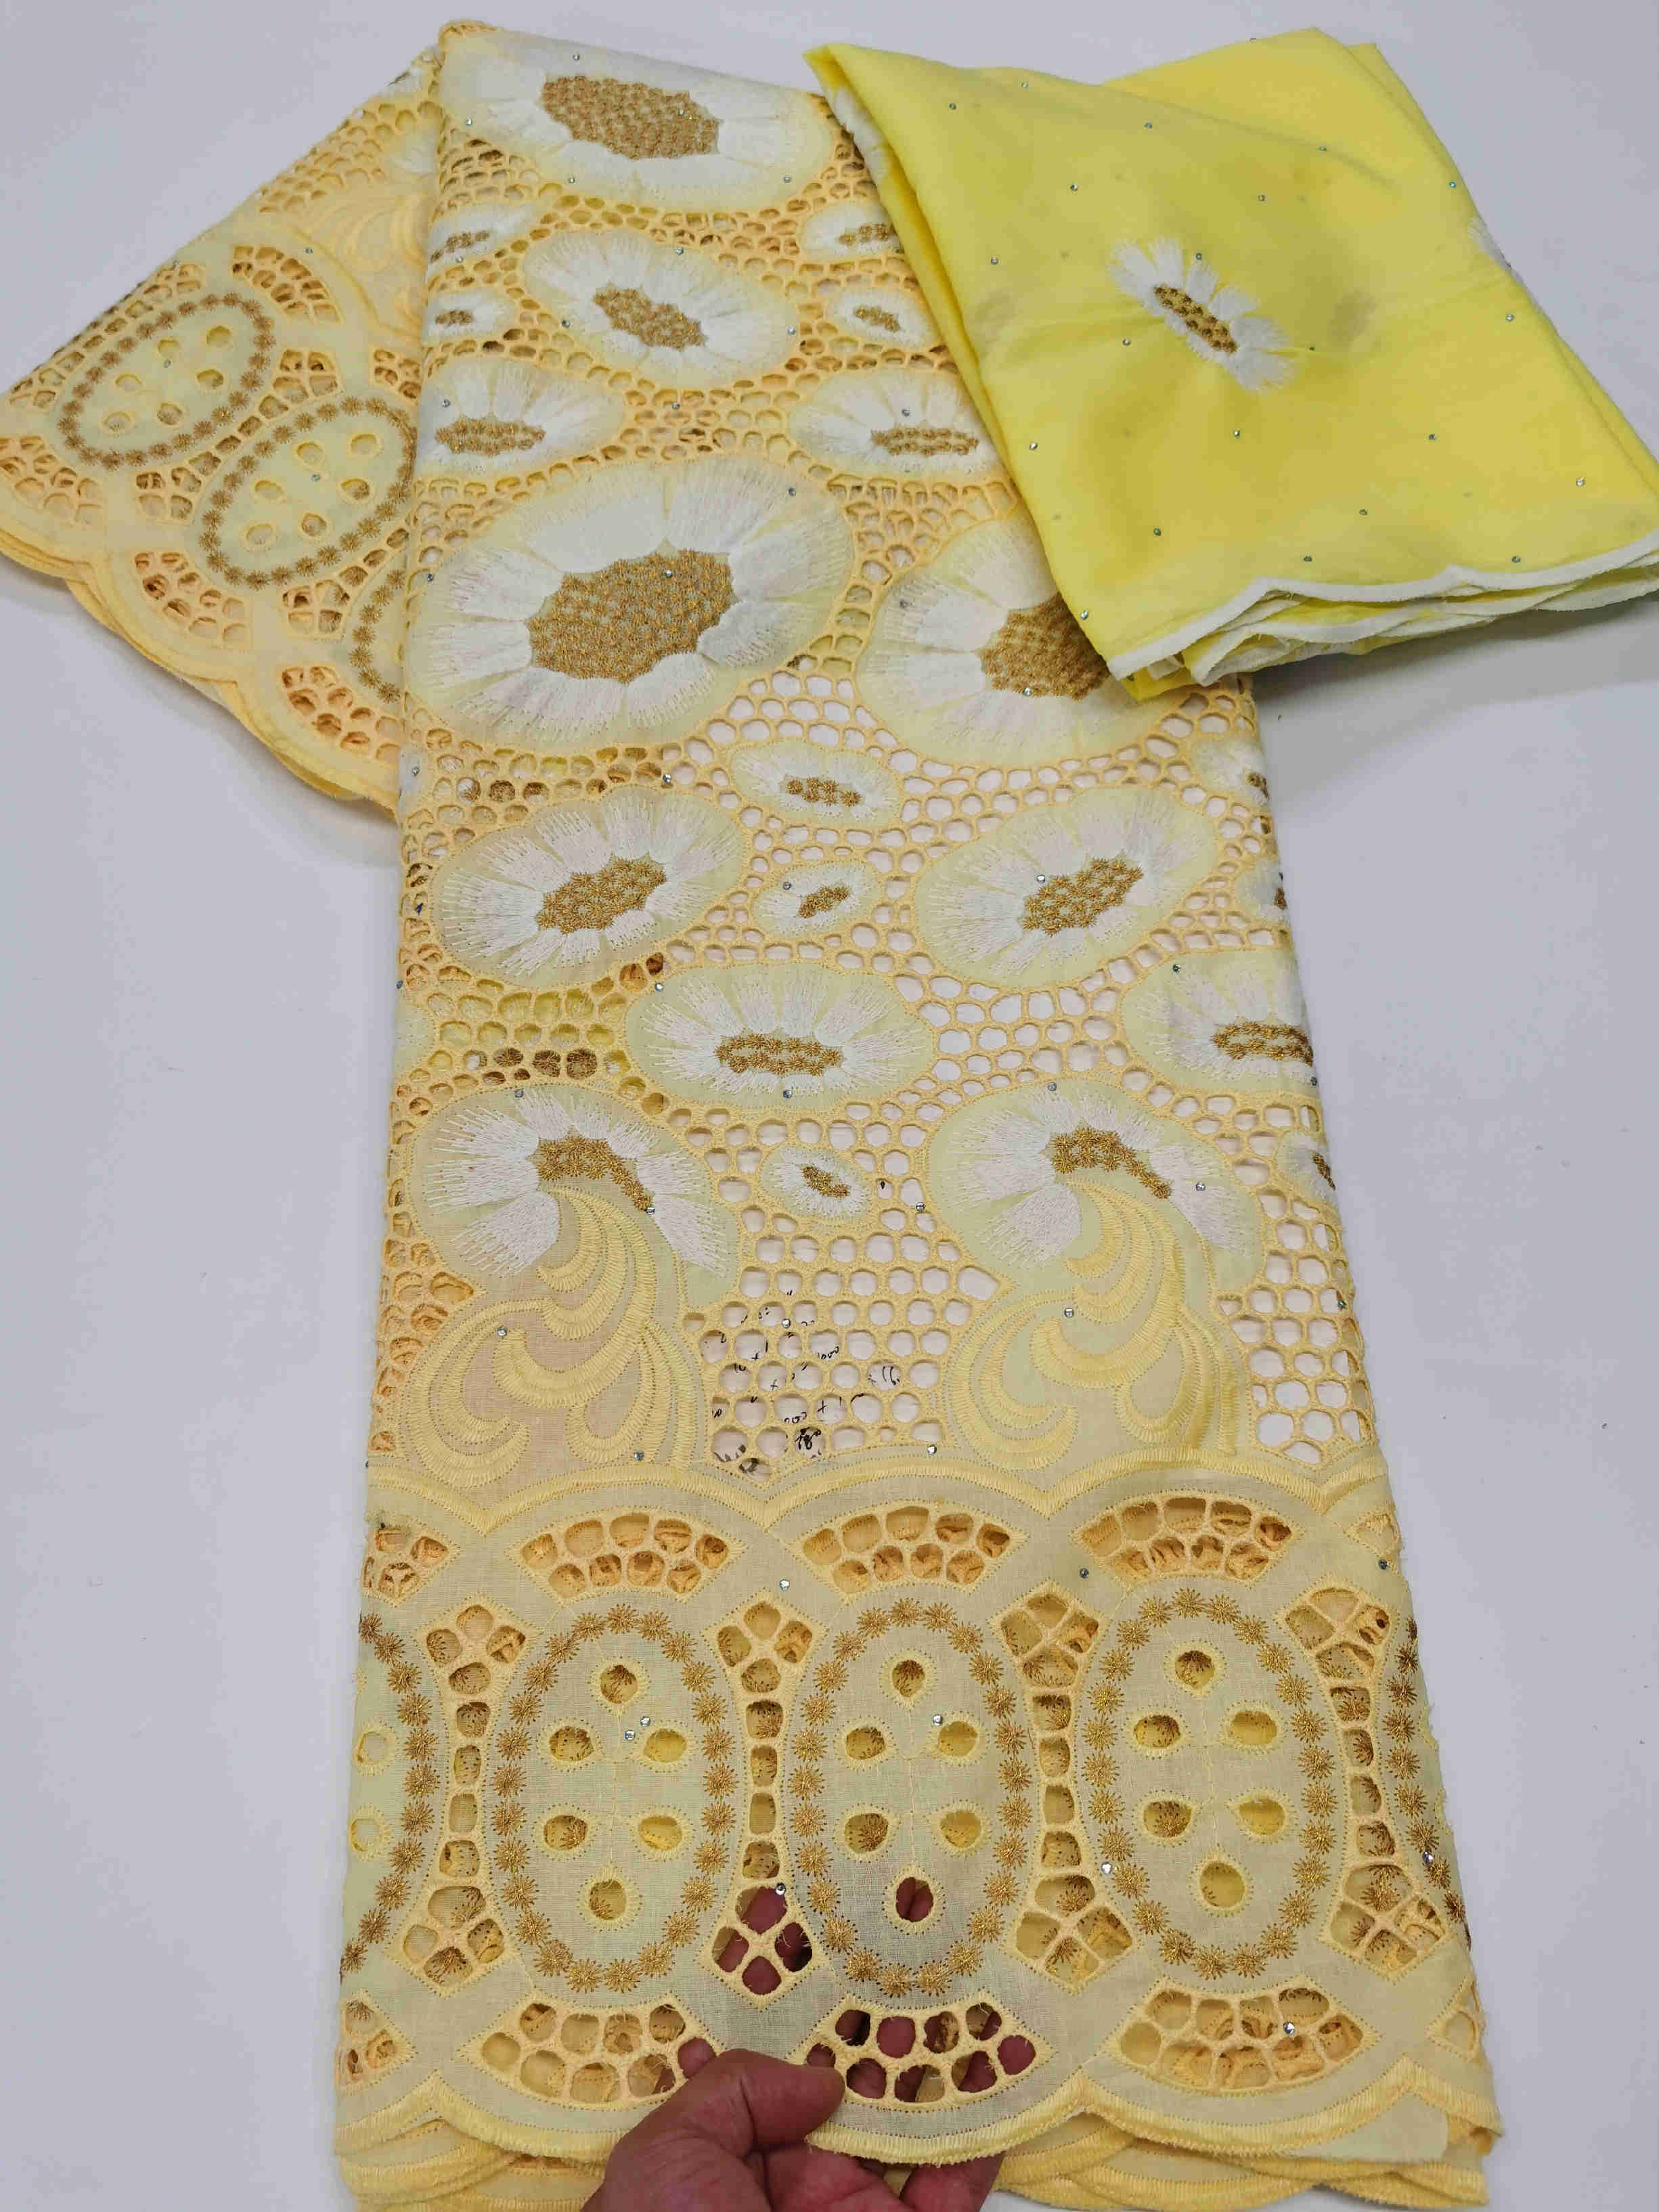 Dubai Fabric African 100%Cotton Lace Fabric 2021 High Quality Lace Material In Switzerland Embroidery Swiss Voile Lace Fabric 7Y